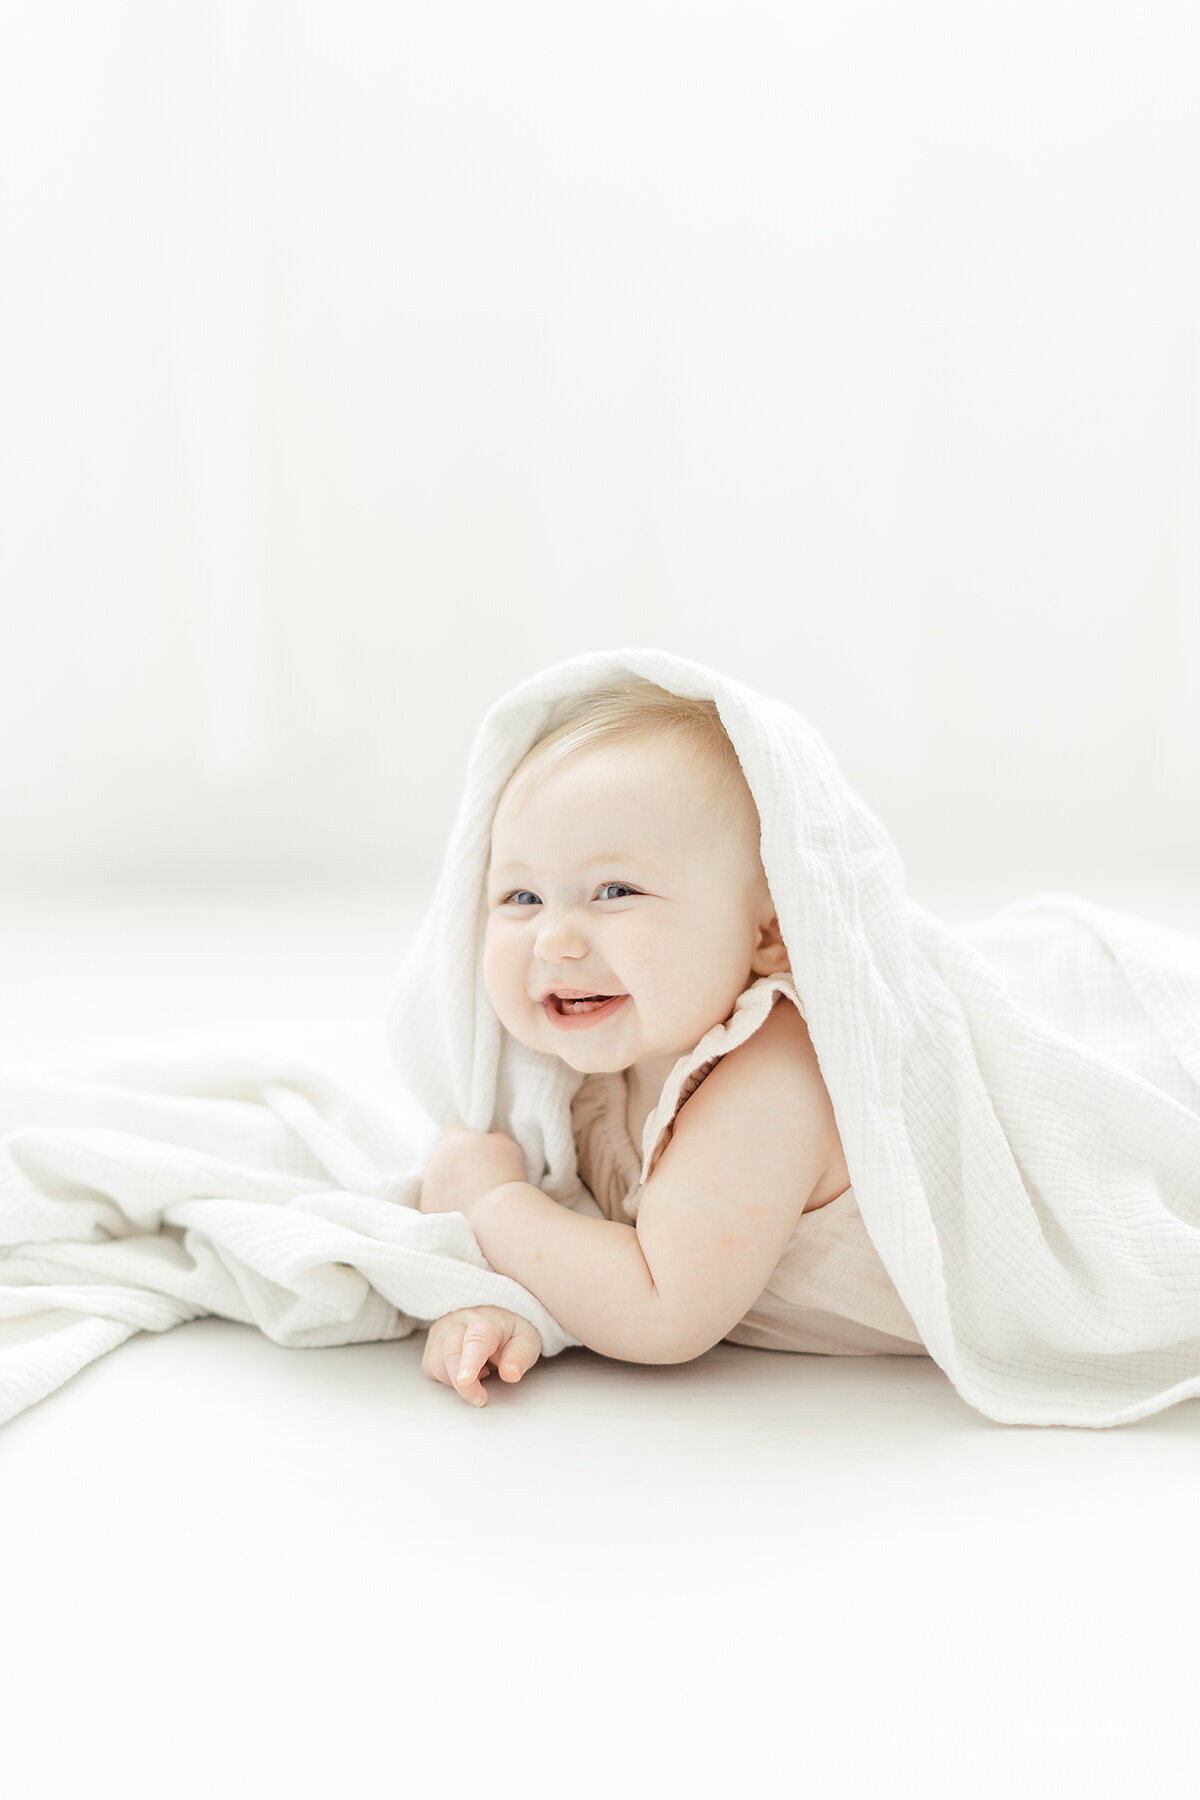 Baby girl playing around under a blanket for her mommy and me session with her mother at a Frisco photography studio.